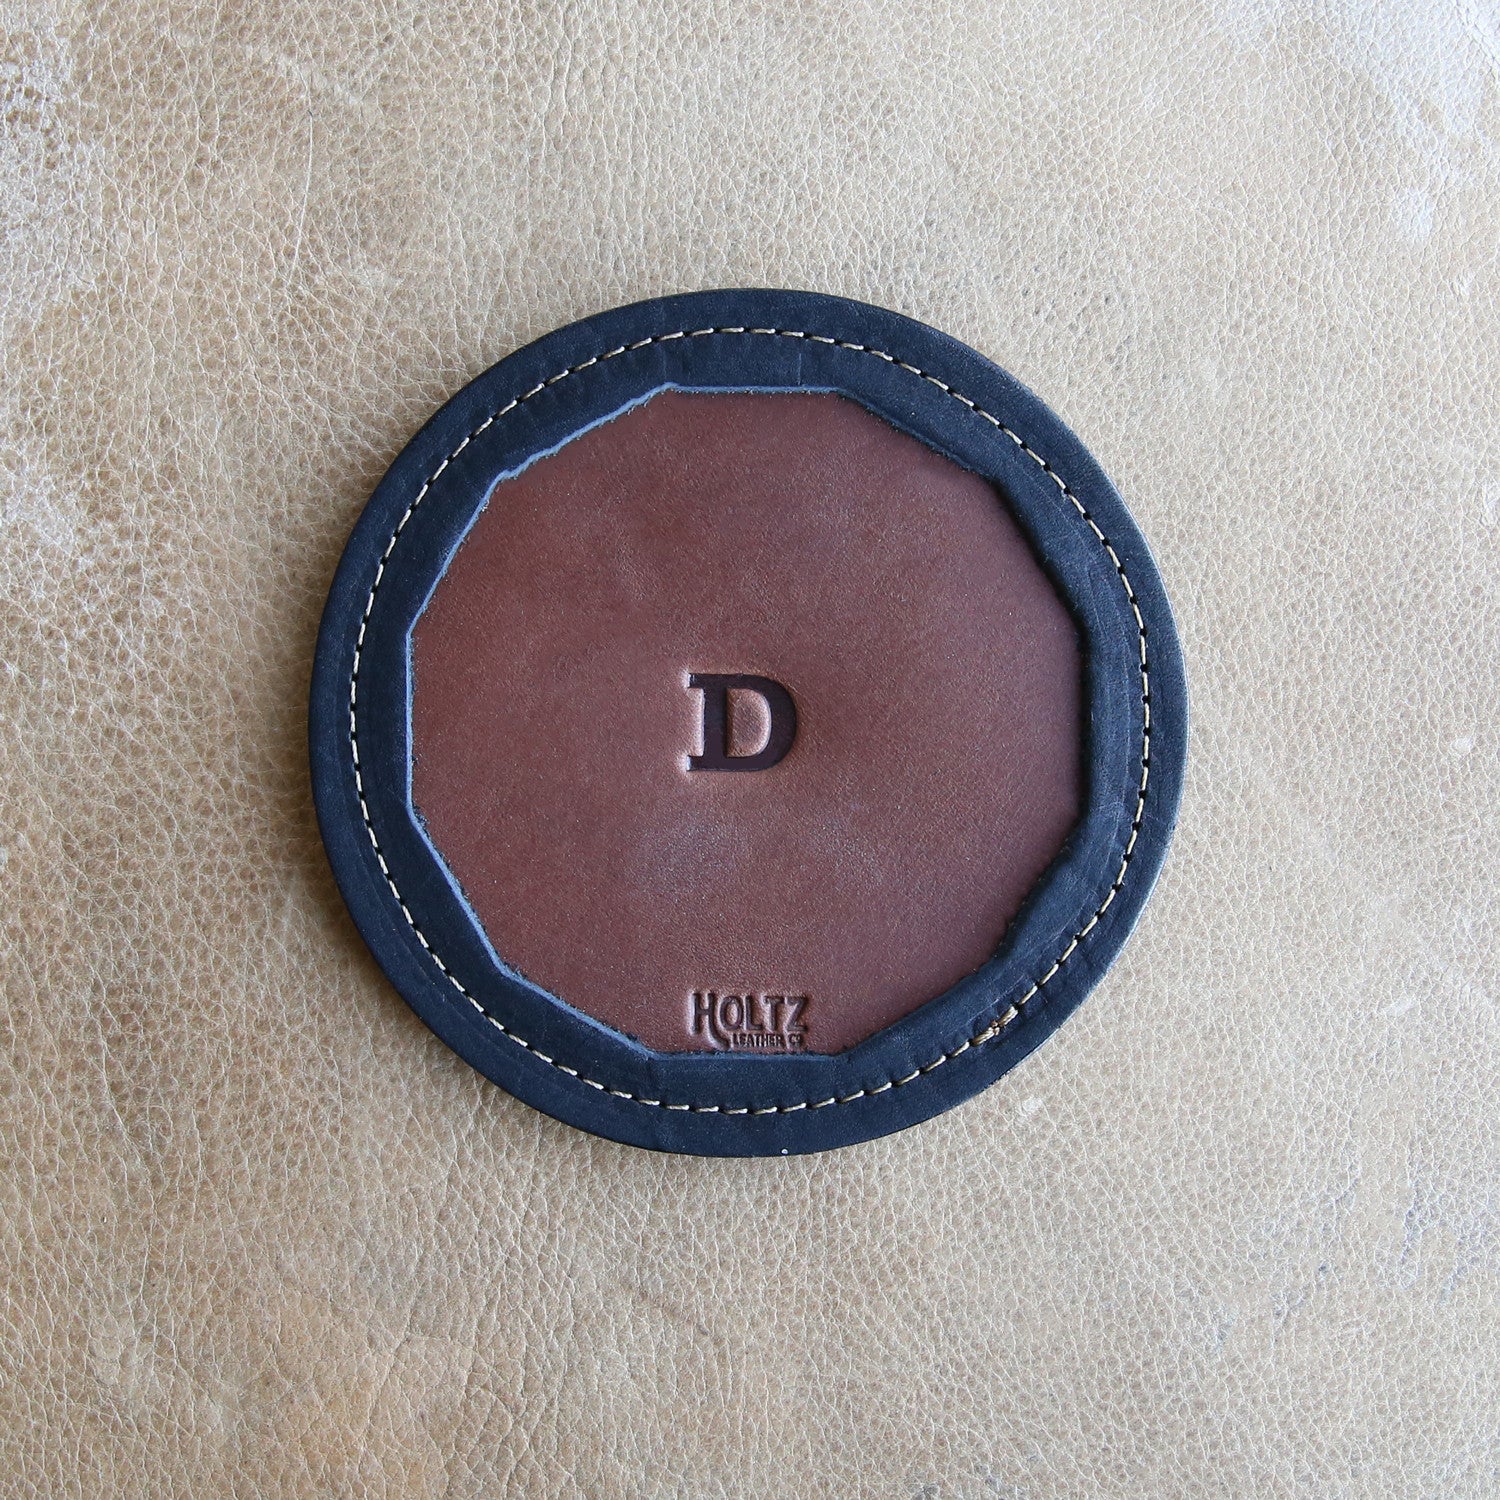 Set of 4 fine American leather coasters with personalized initial handcrafted at Holtz Leather Co in Huntsville, Alabama